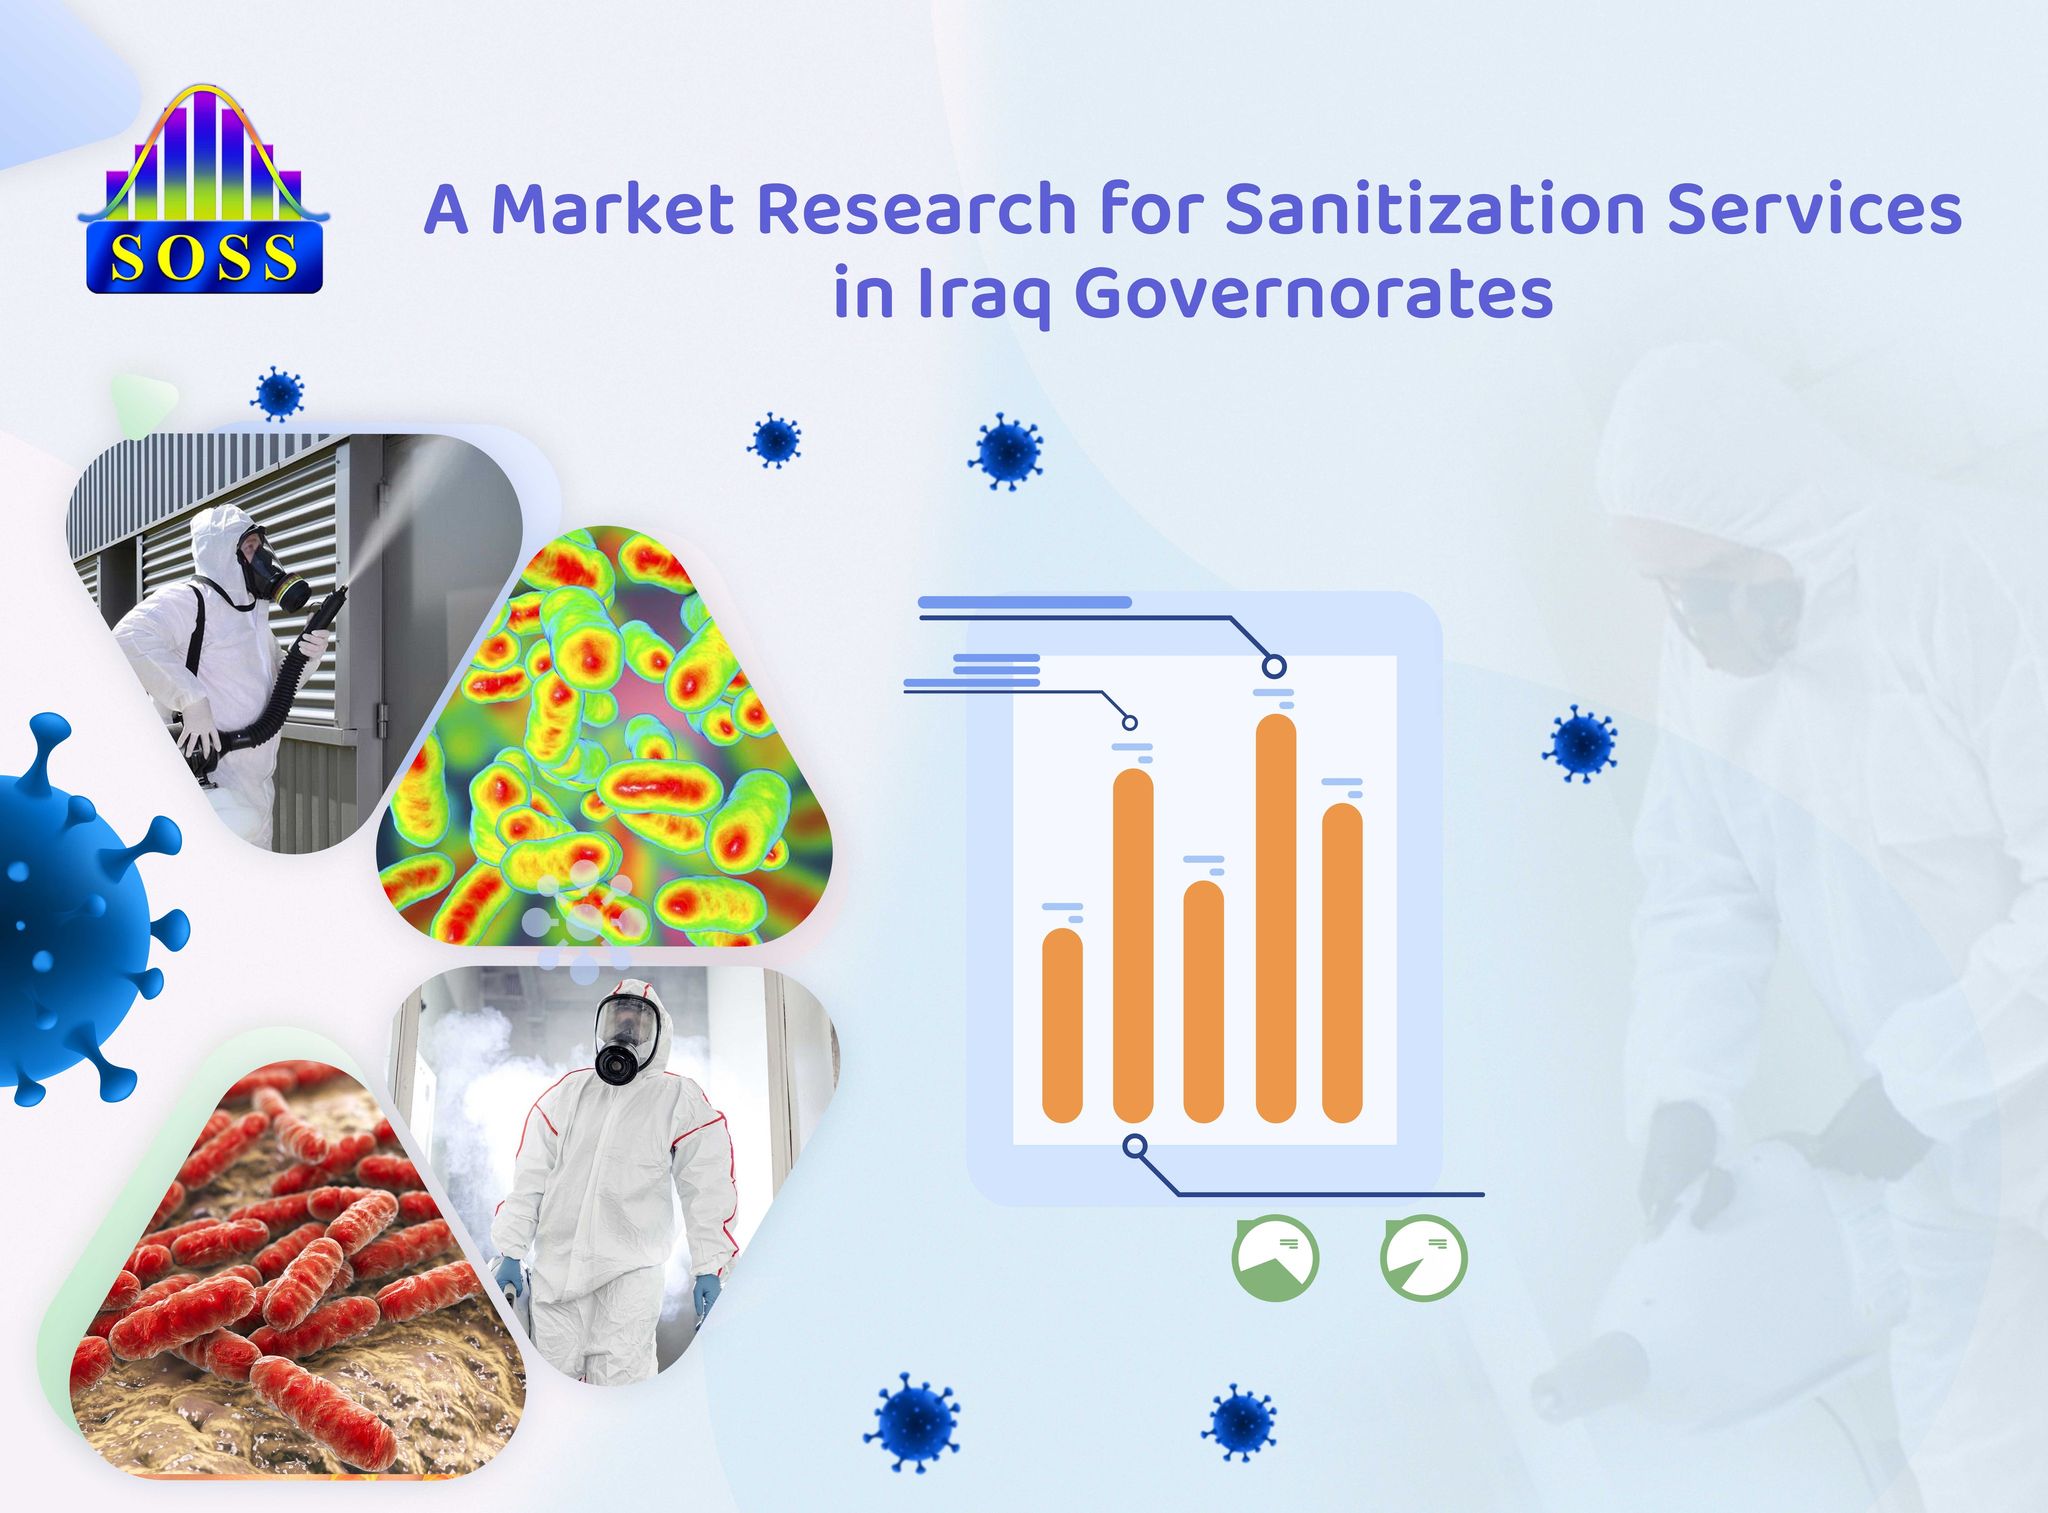 A Market Research for Sanitization Services in Iraq's Governorates